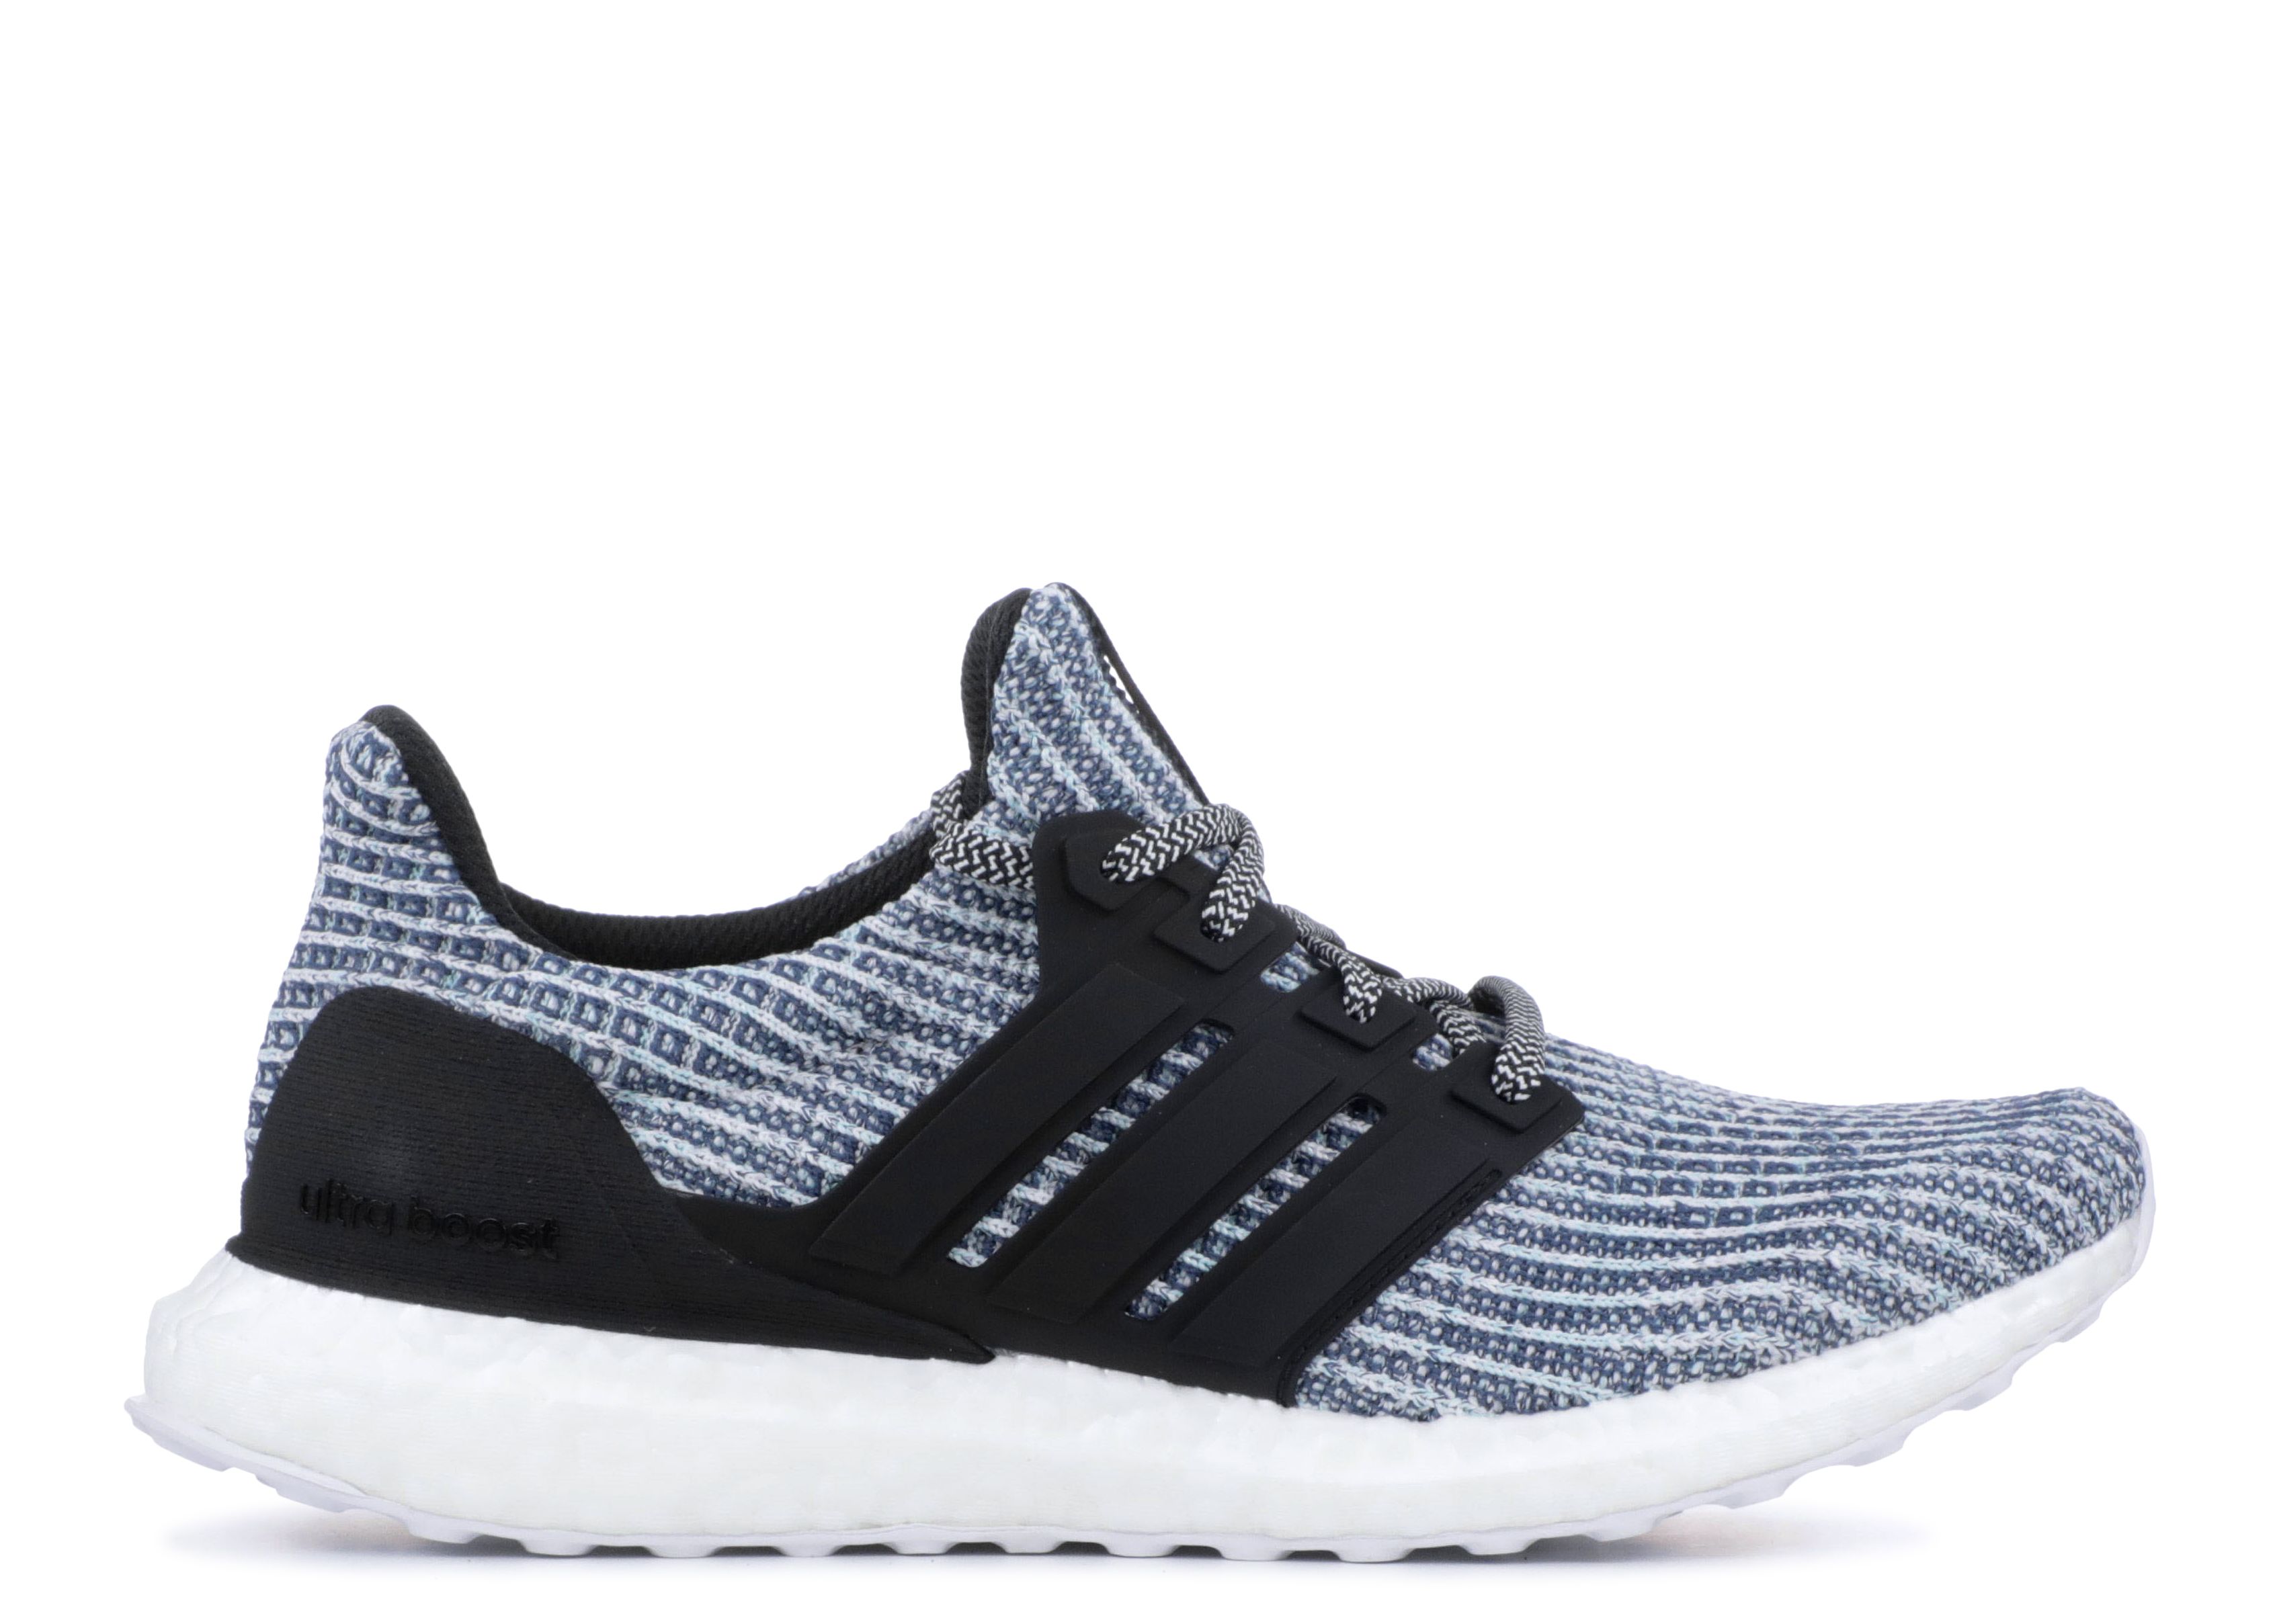 ultraboost parley carbon